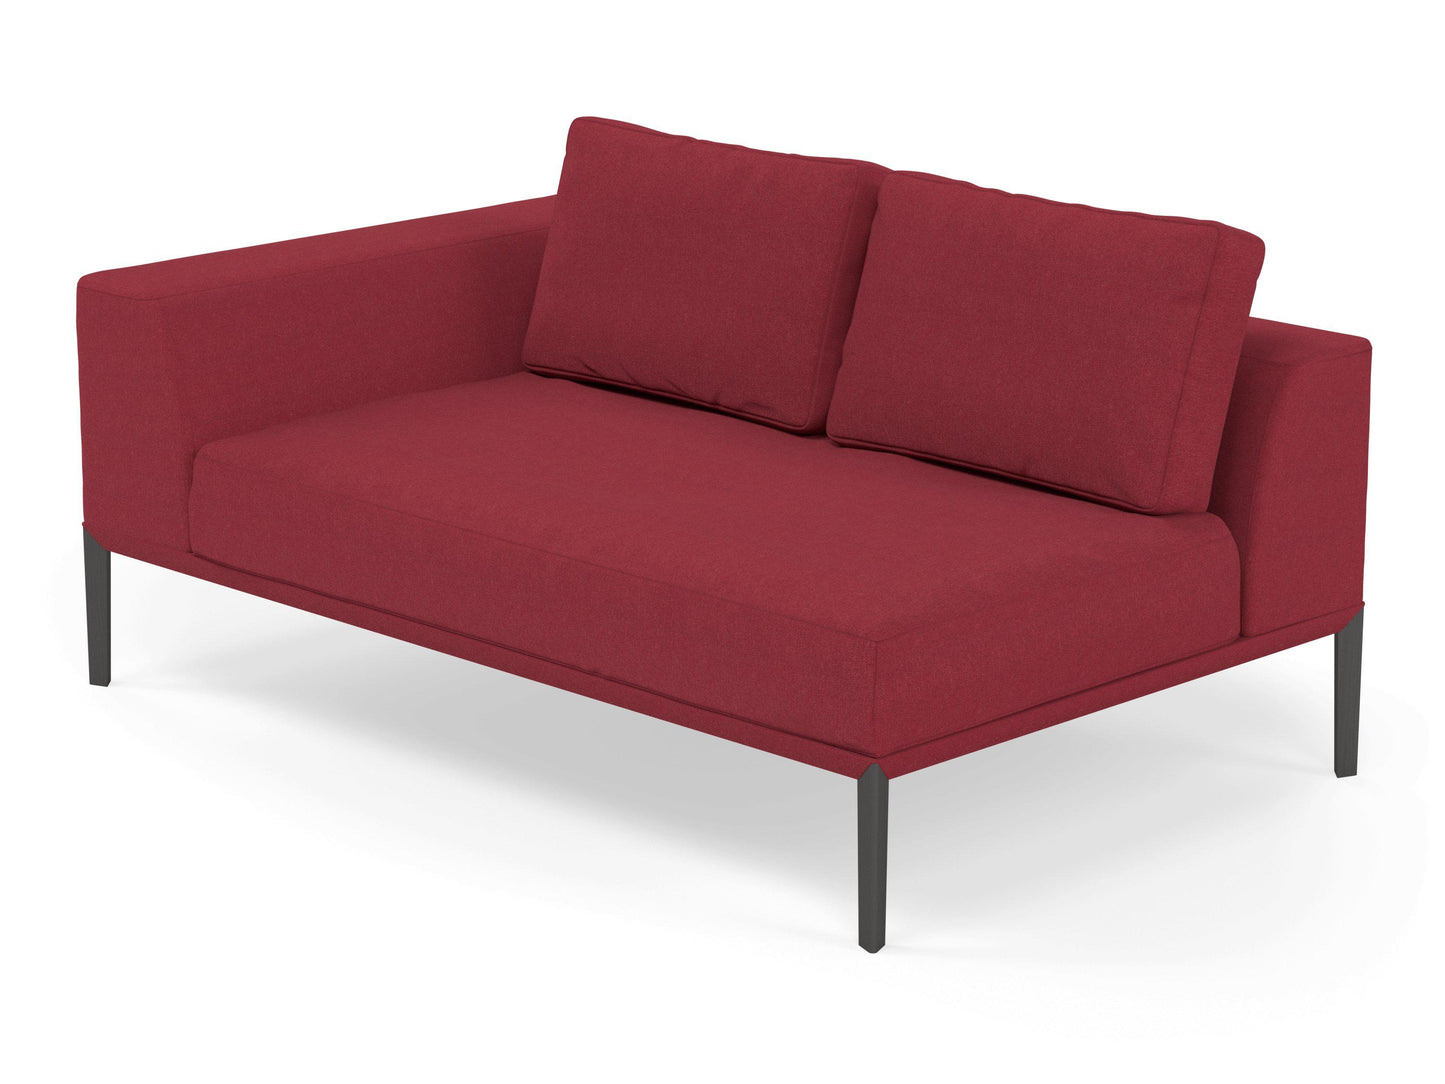 Modern 2 Seater Chaise Lounge Style Sofa with Right Armrest in Rasberry Red Fabric-Distinct Designs (London) Ltd